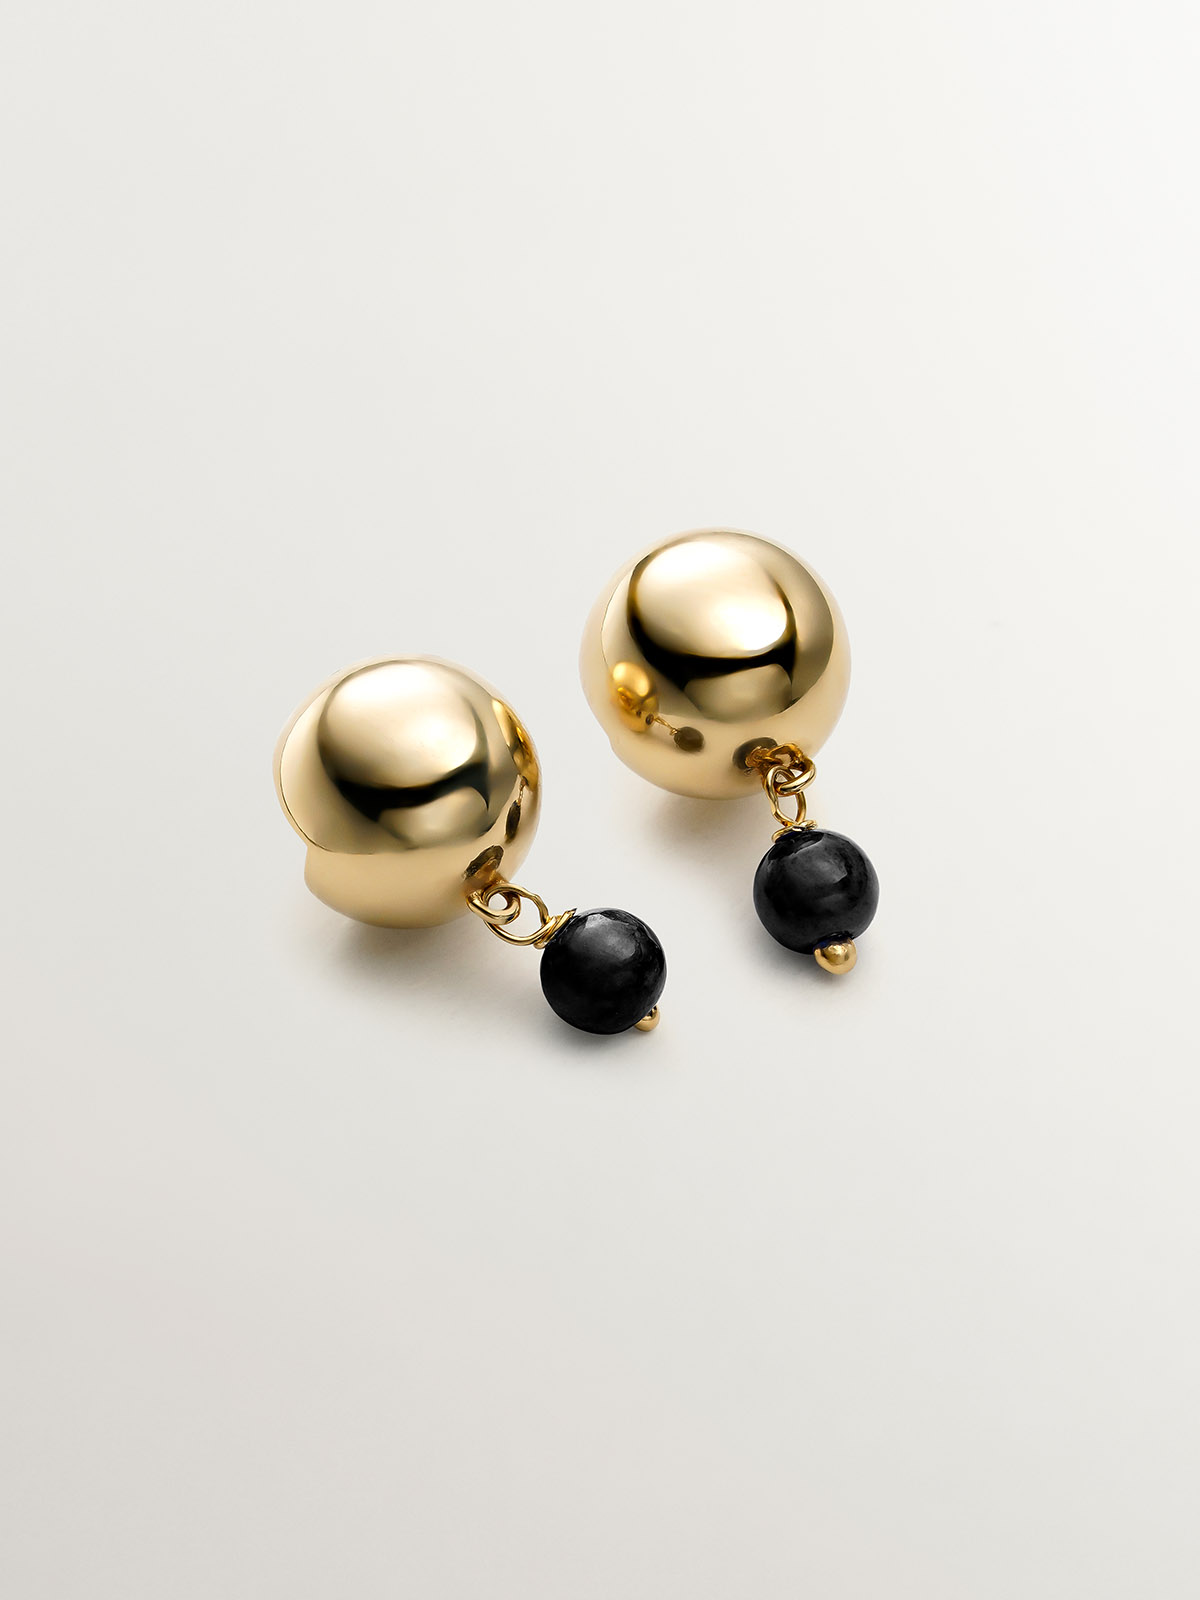 925 silver earrings bathed in 18k yellow gold with black ónix